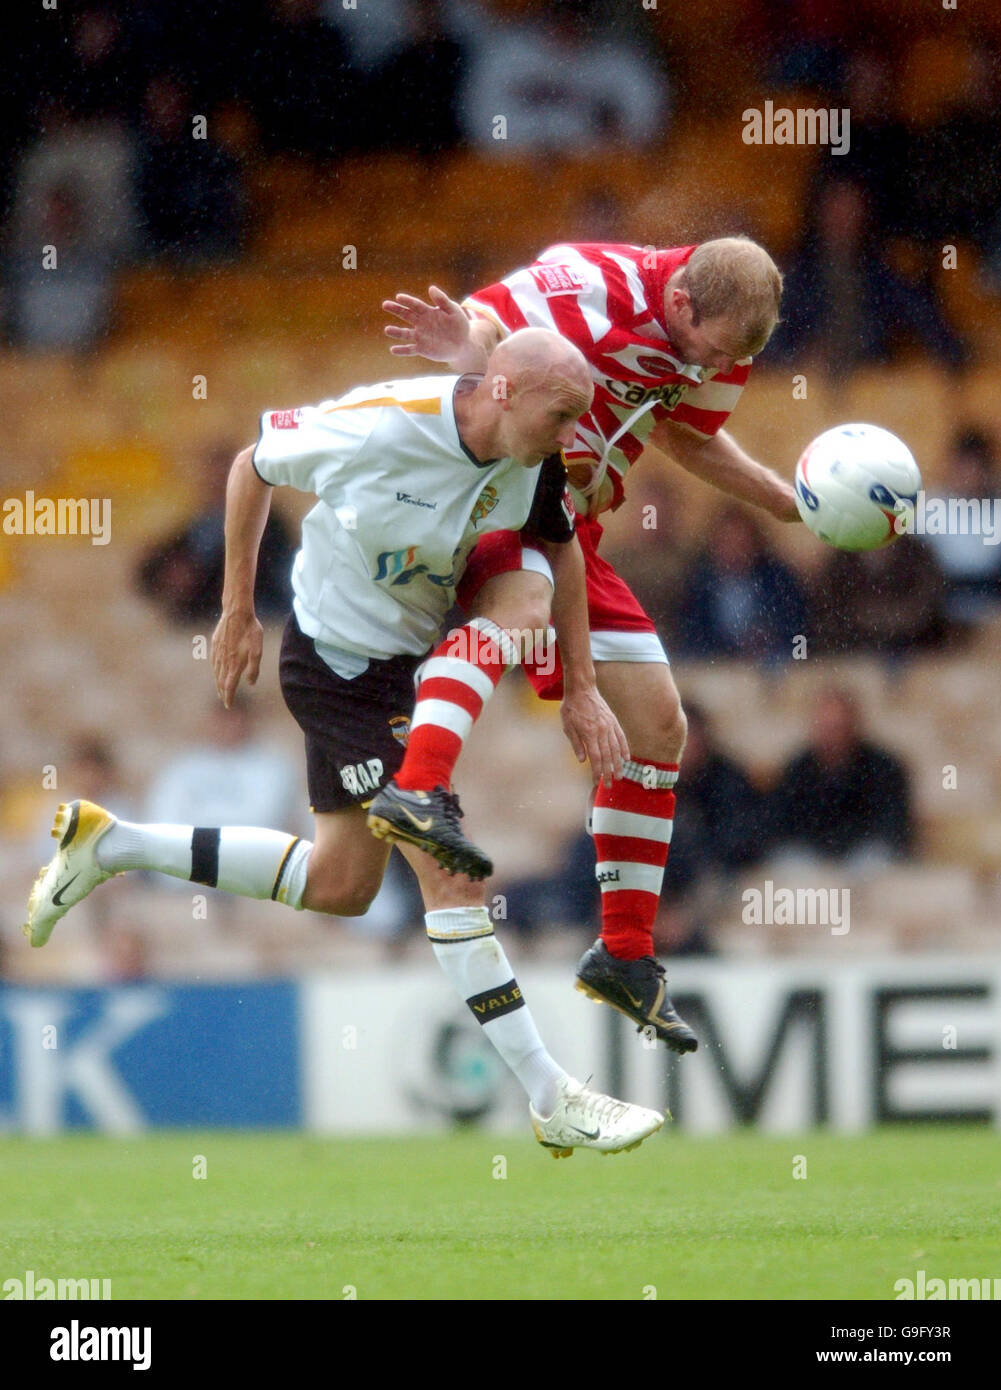 Port Vale's Danny Whitaker and Doncaster Rovers' Gareth Roberts battle for possession of the ball Stock Photo